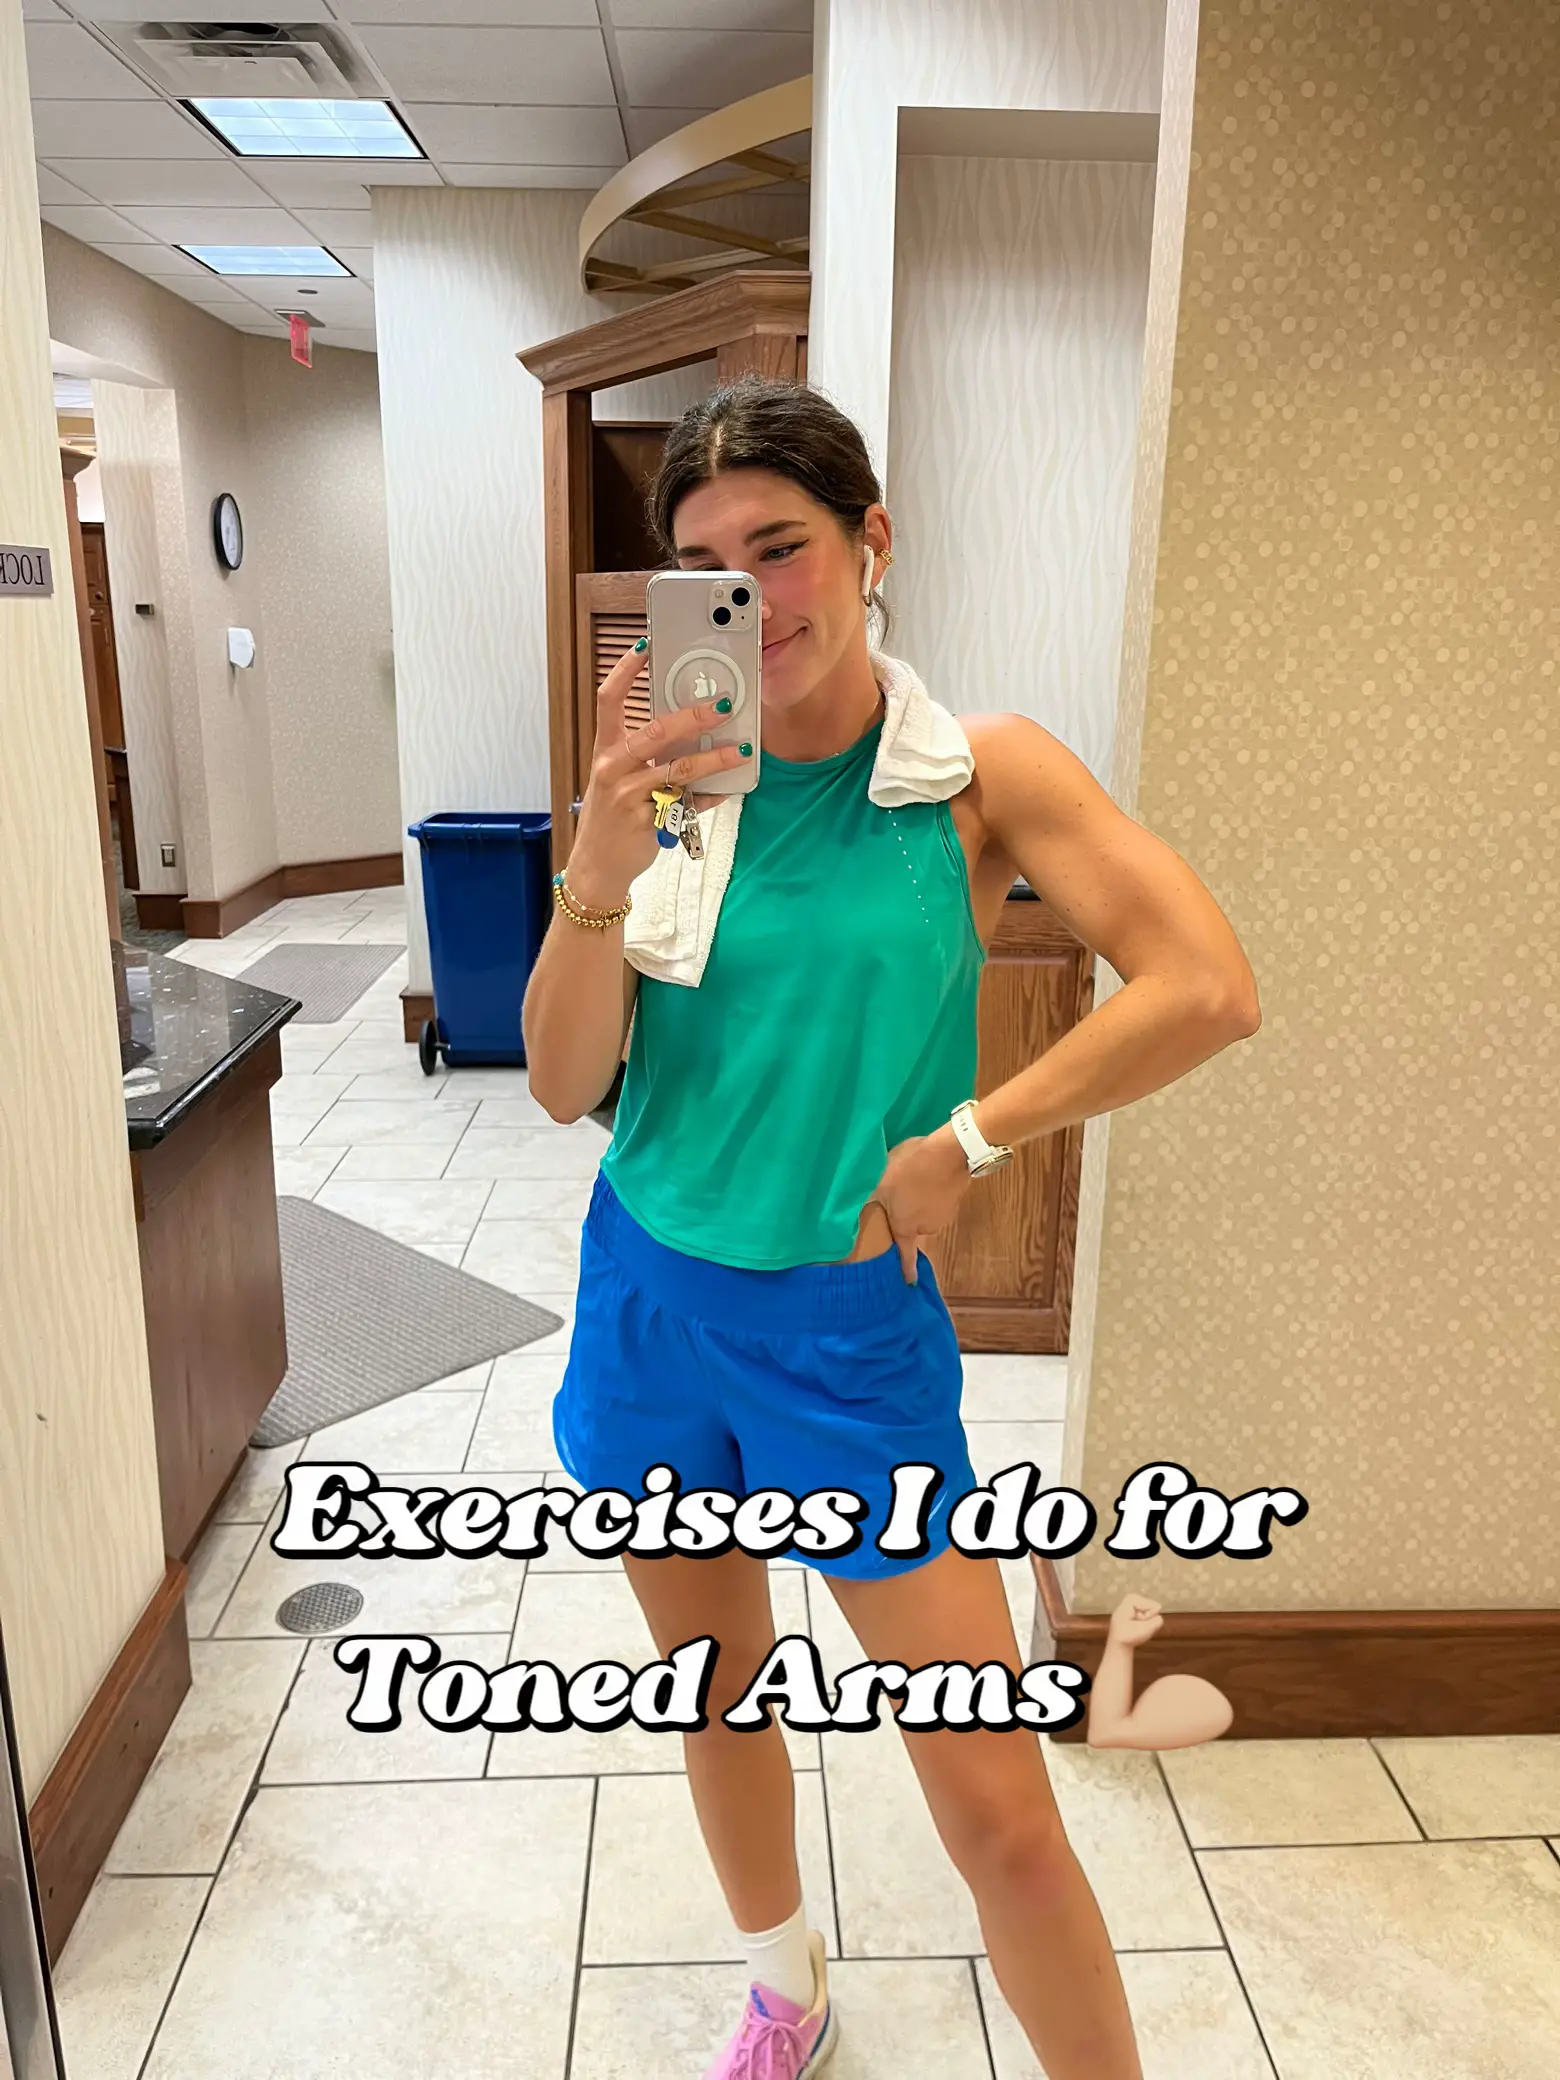 Do you want toned arms? Then do this 3 times a week 🔥💪🏽. Only